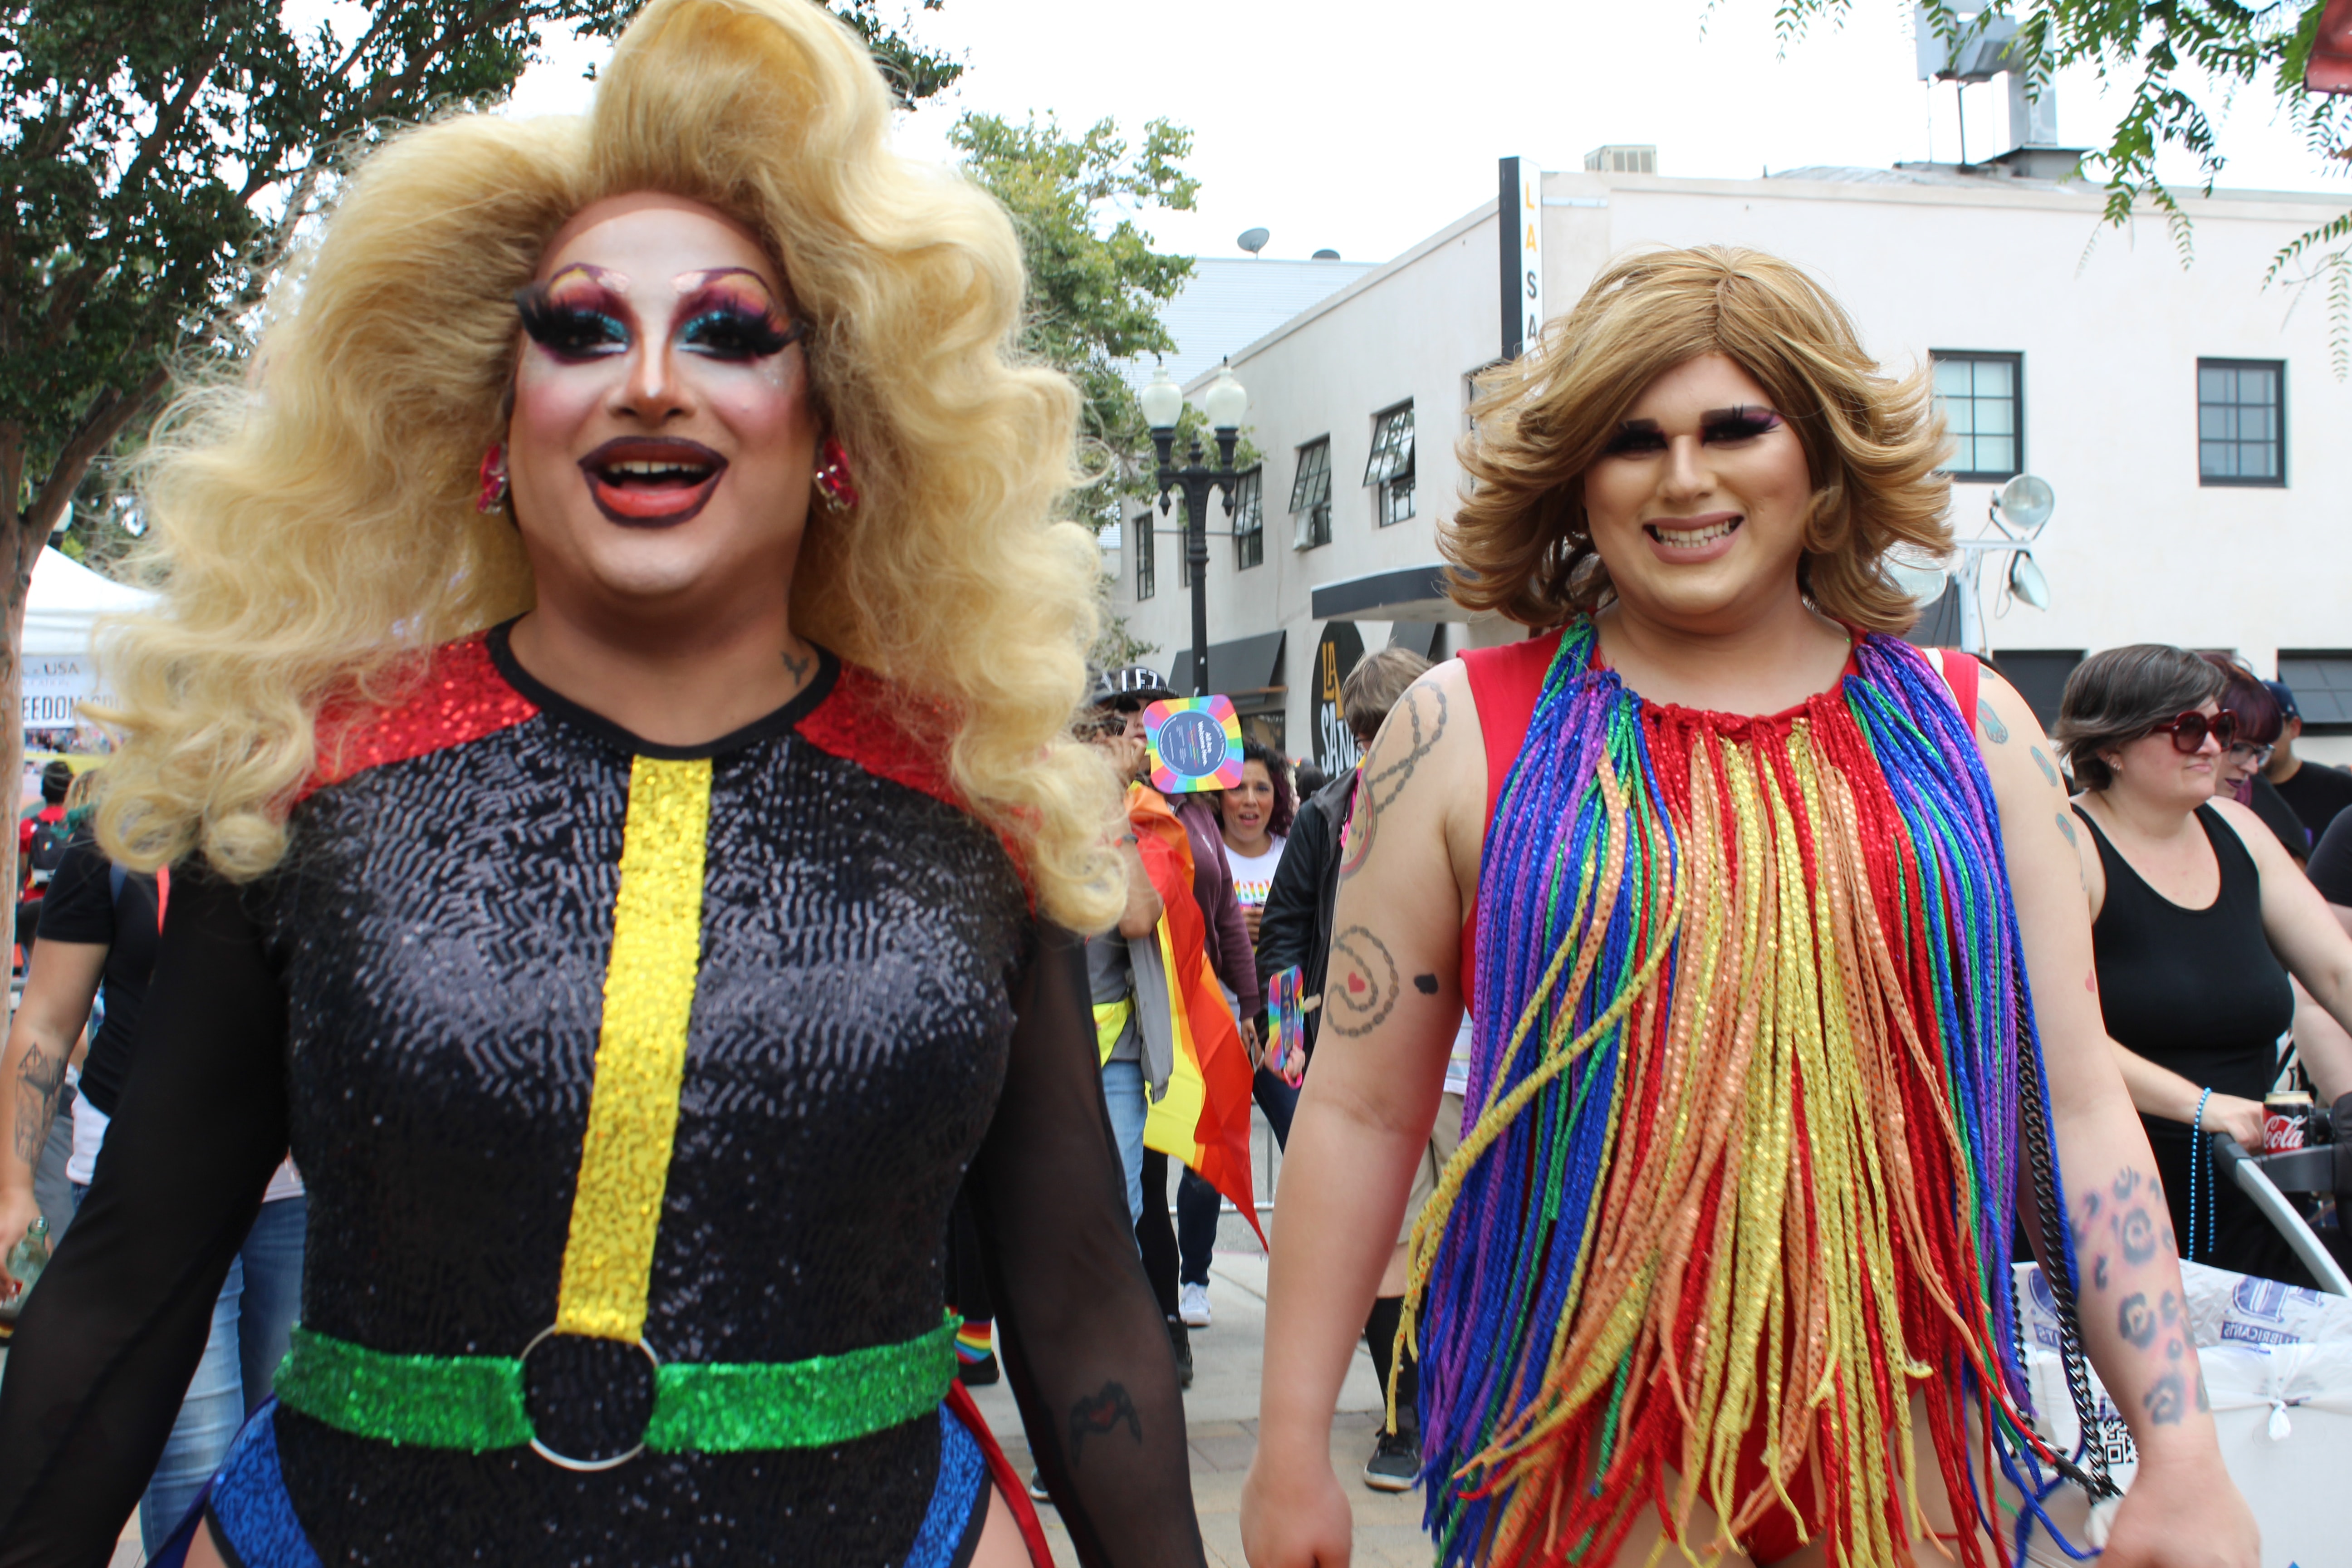 Two pride participants wearing drag outfits